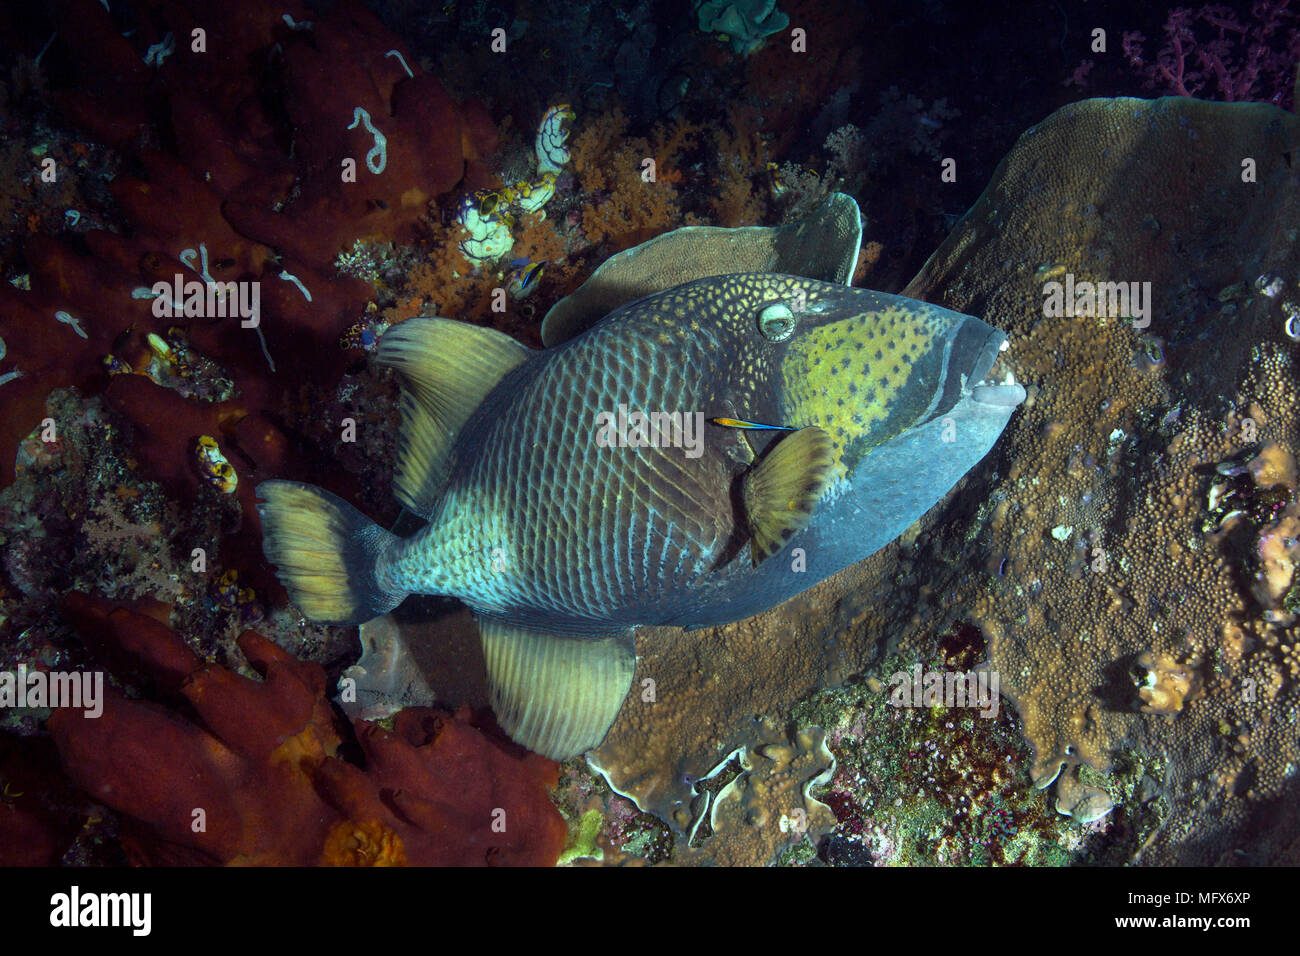 Titan triggerfish  (Balistoides viridescens) and Bluestreak cleaner wrasse (Labroides dimidiatus). Picture was taken in the Banda sea, Ambon, West Pap Stock Photo